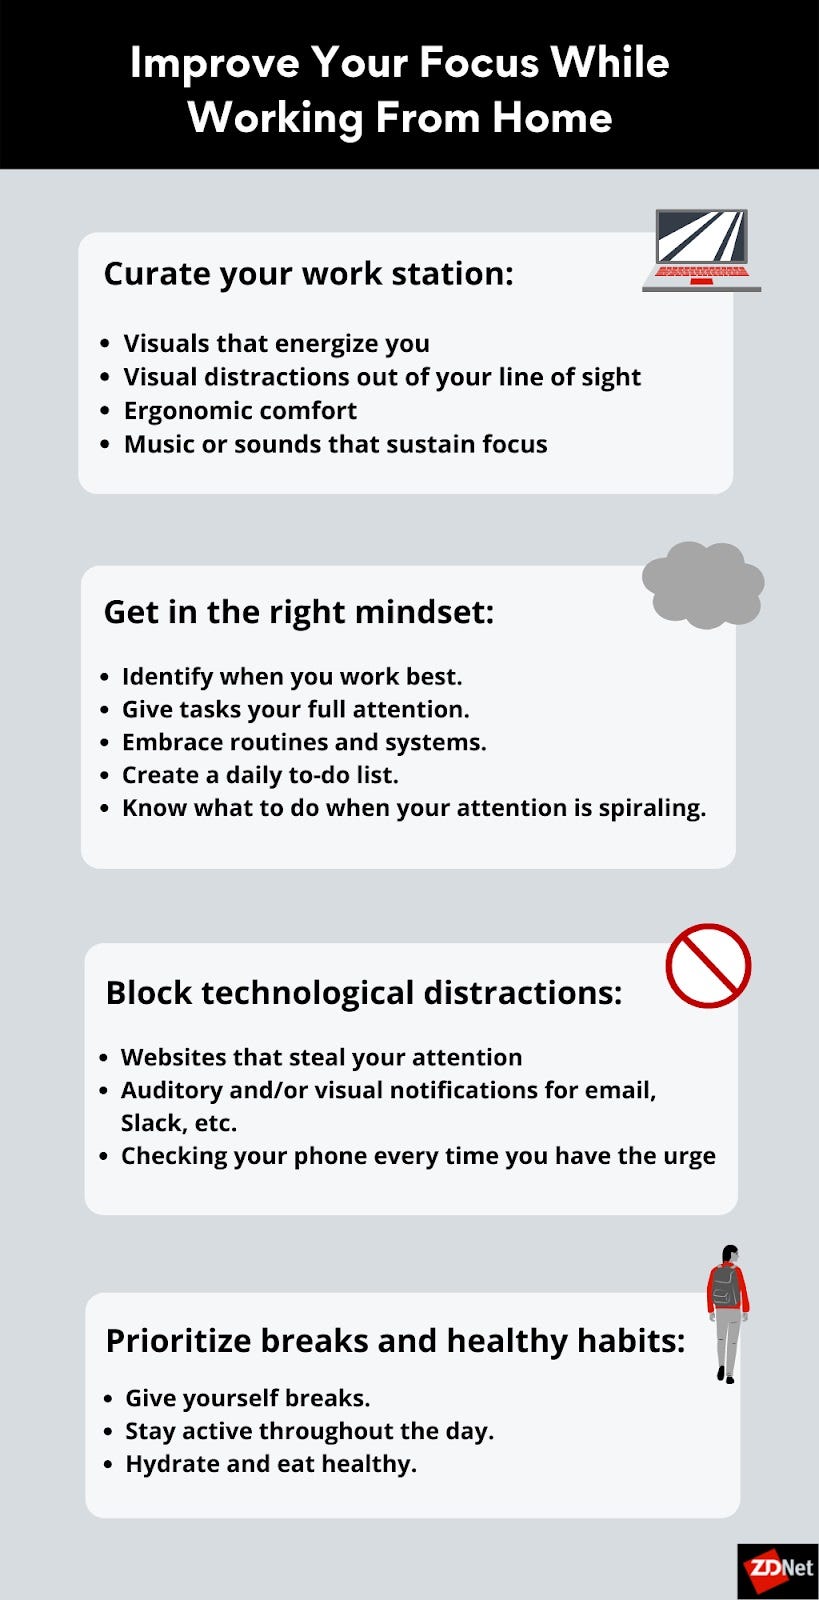 A graphic summarizing this article's tips for how to improve your focus while working from home. Tips include: Curate your work station, get in the right mindset, block technological distractions, and prioritize breaks and healthy habits.